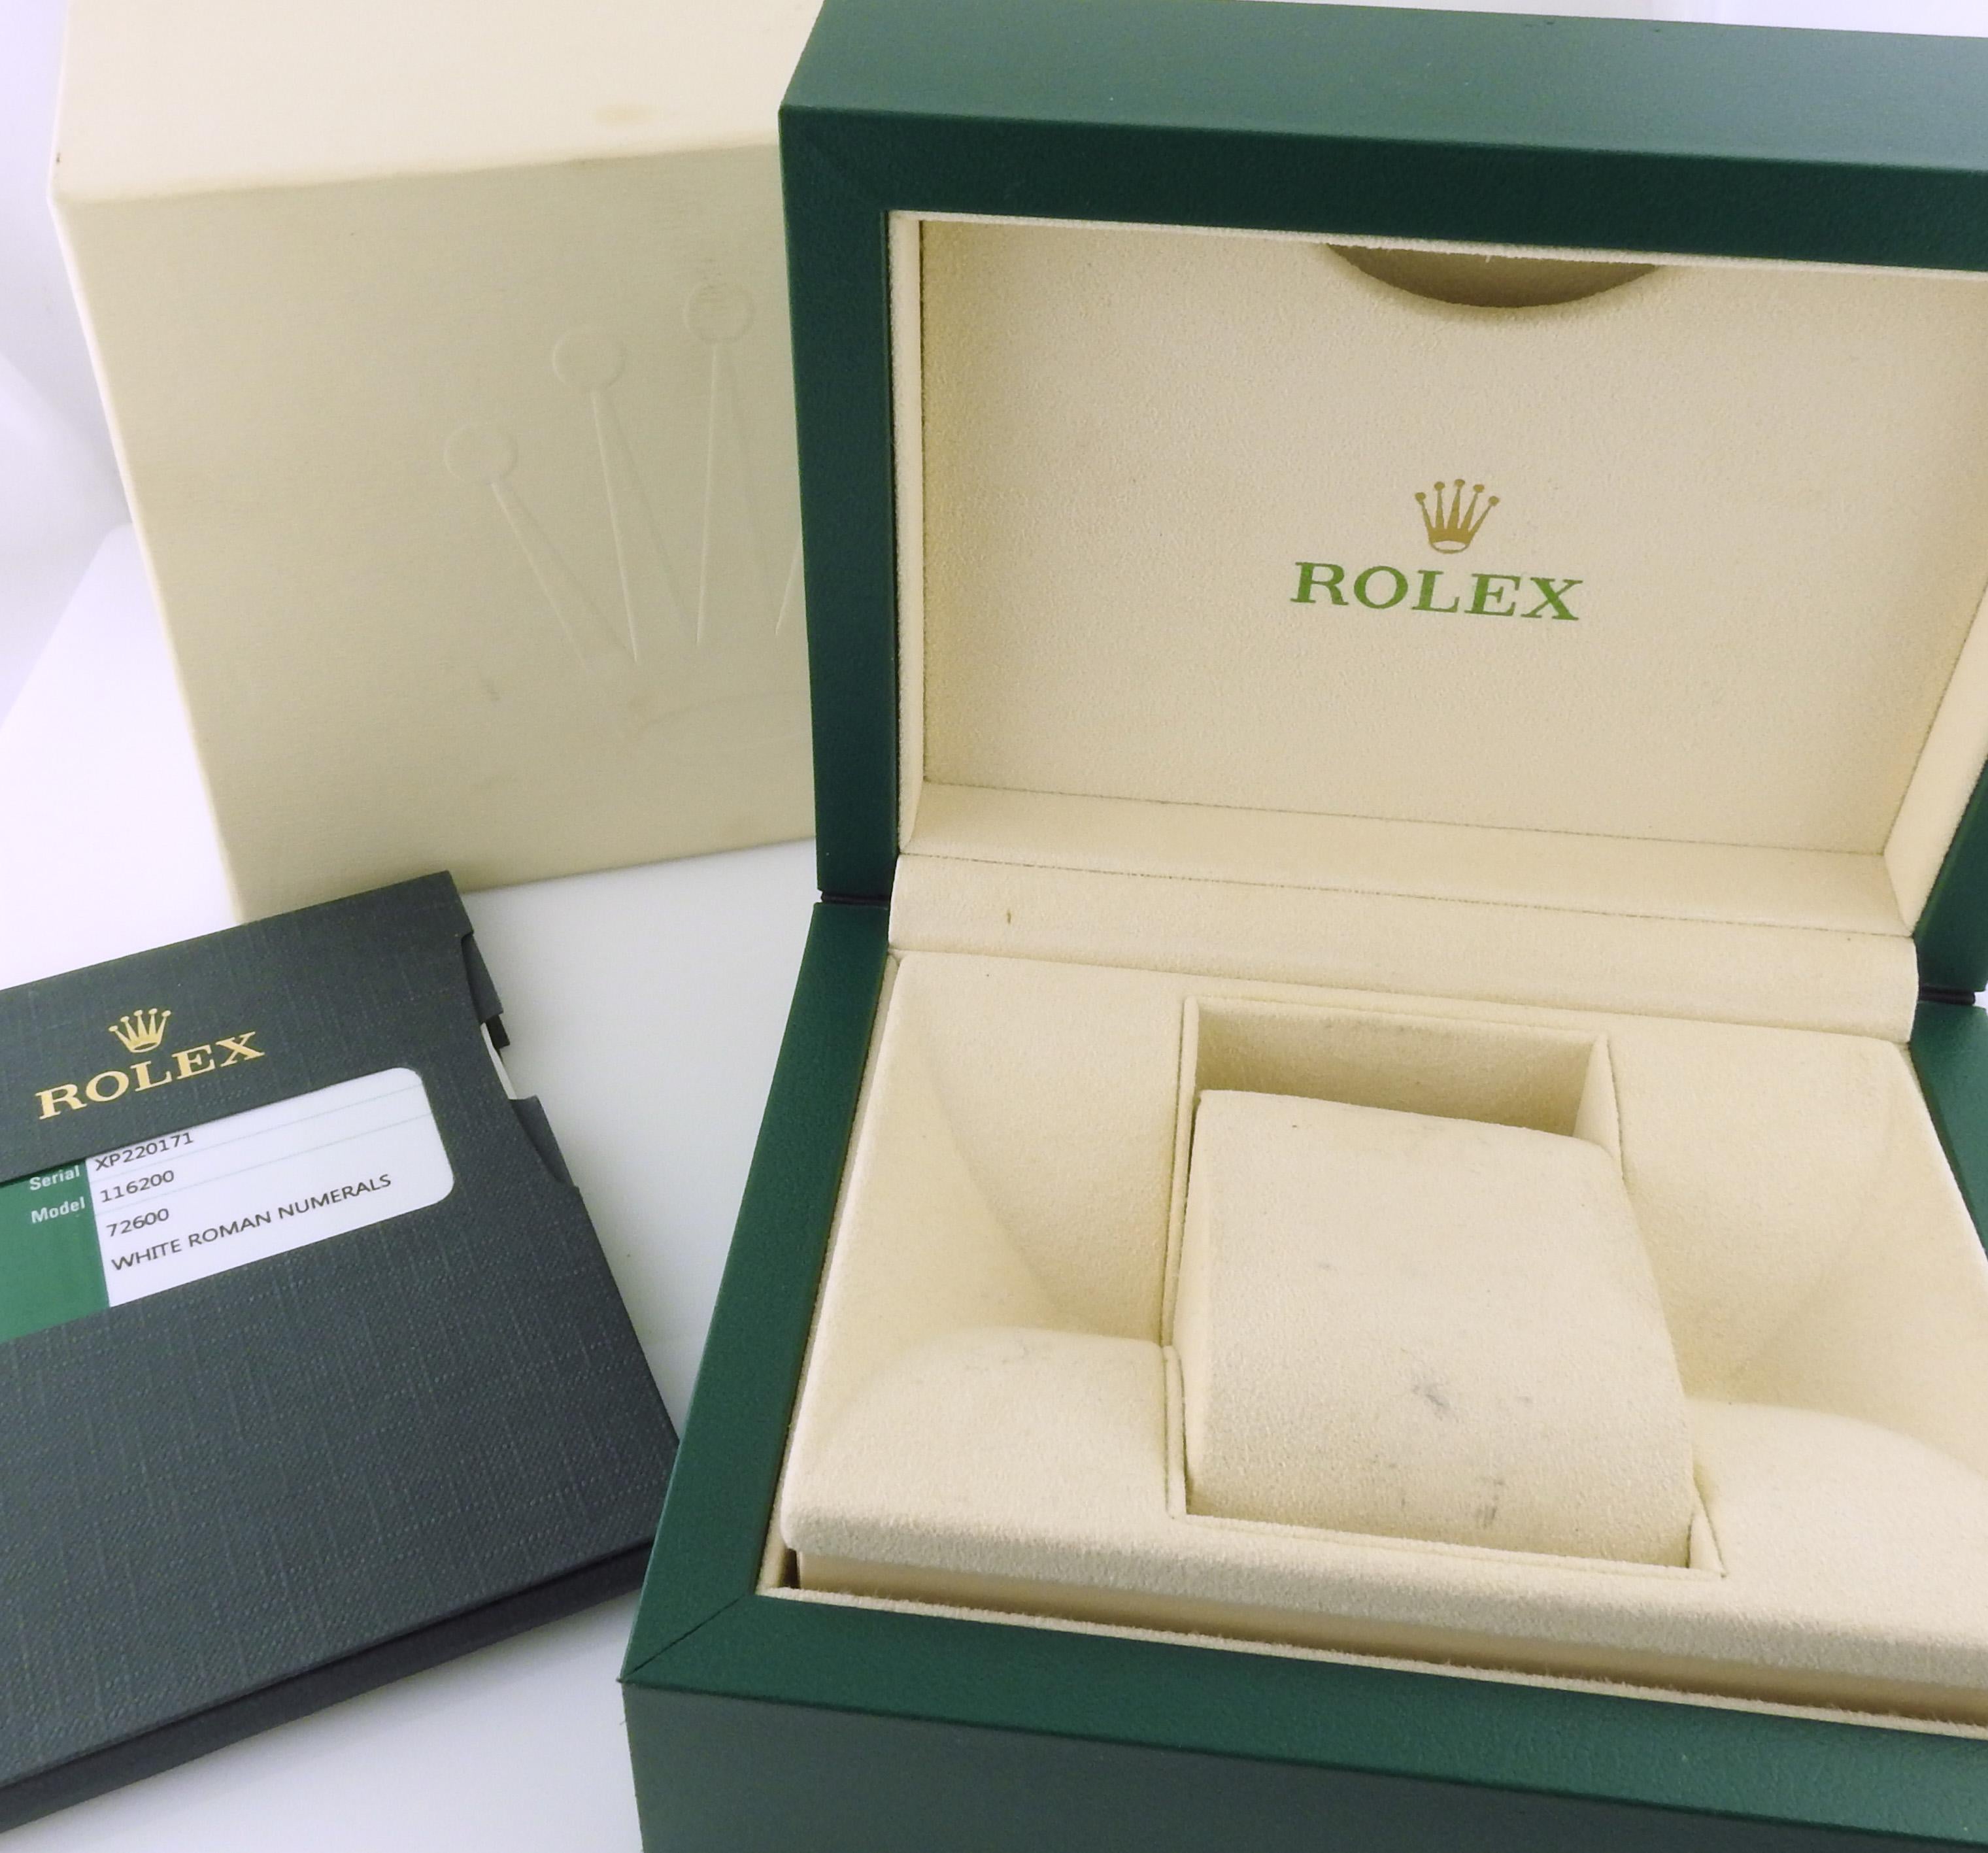 2015 Rolex Men's Datejust 116200 Steel Watch White Roman Dial with Box and Paper 10